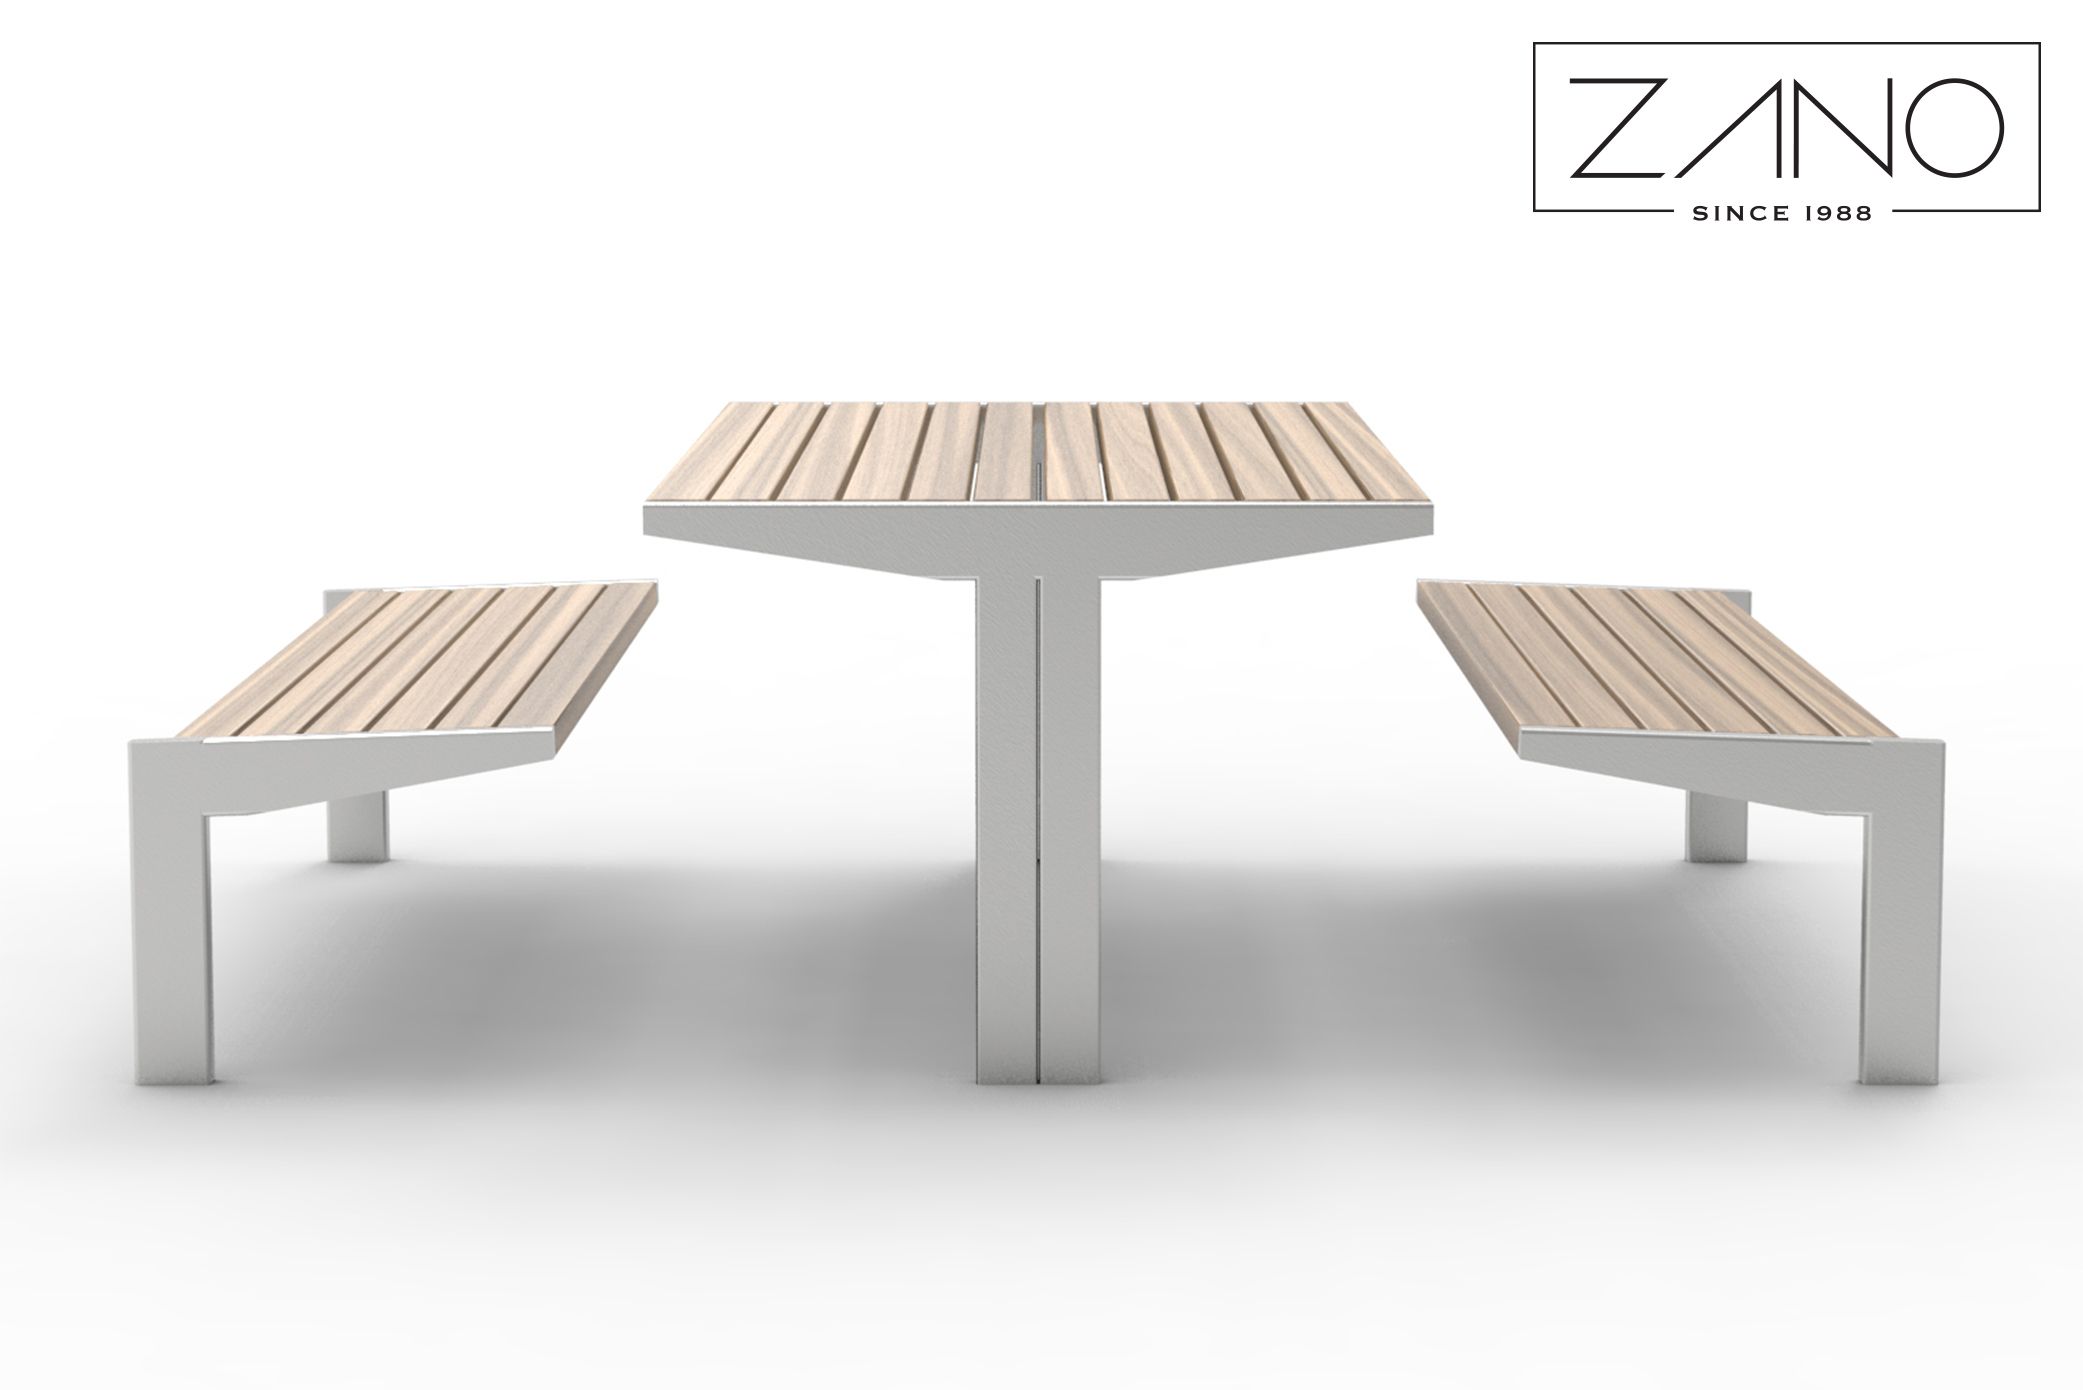 Innovative outdoor street furniture bench and seats design